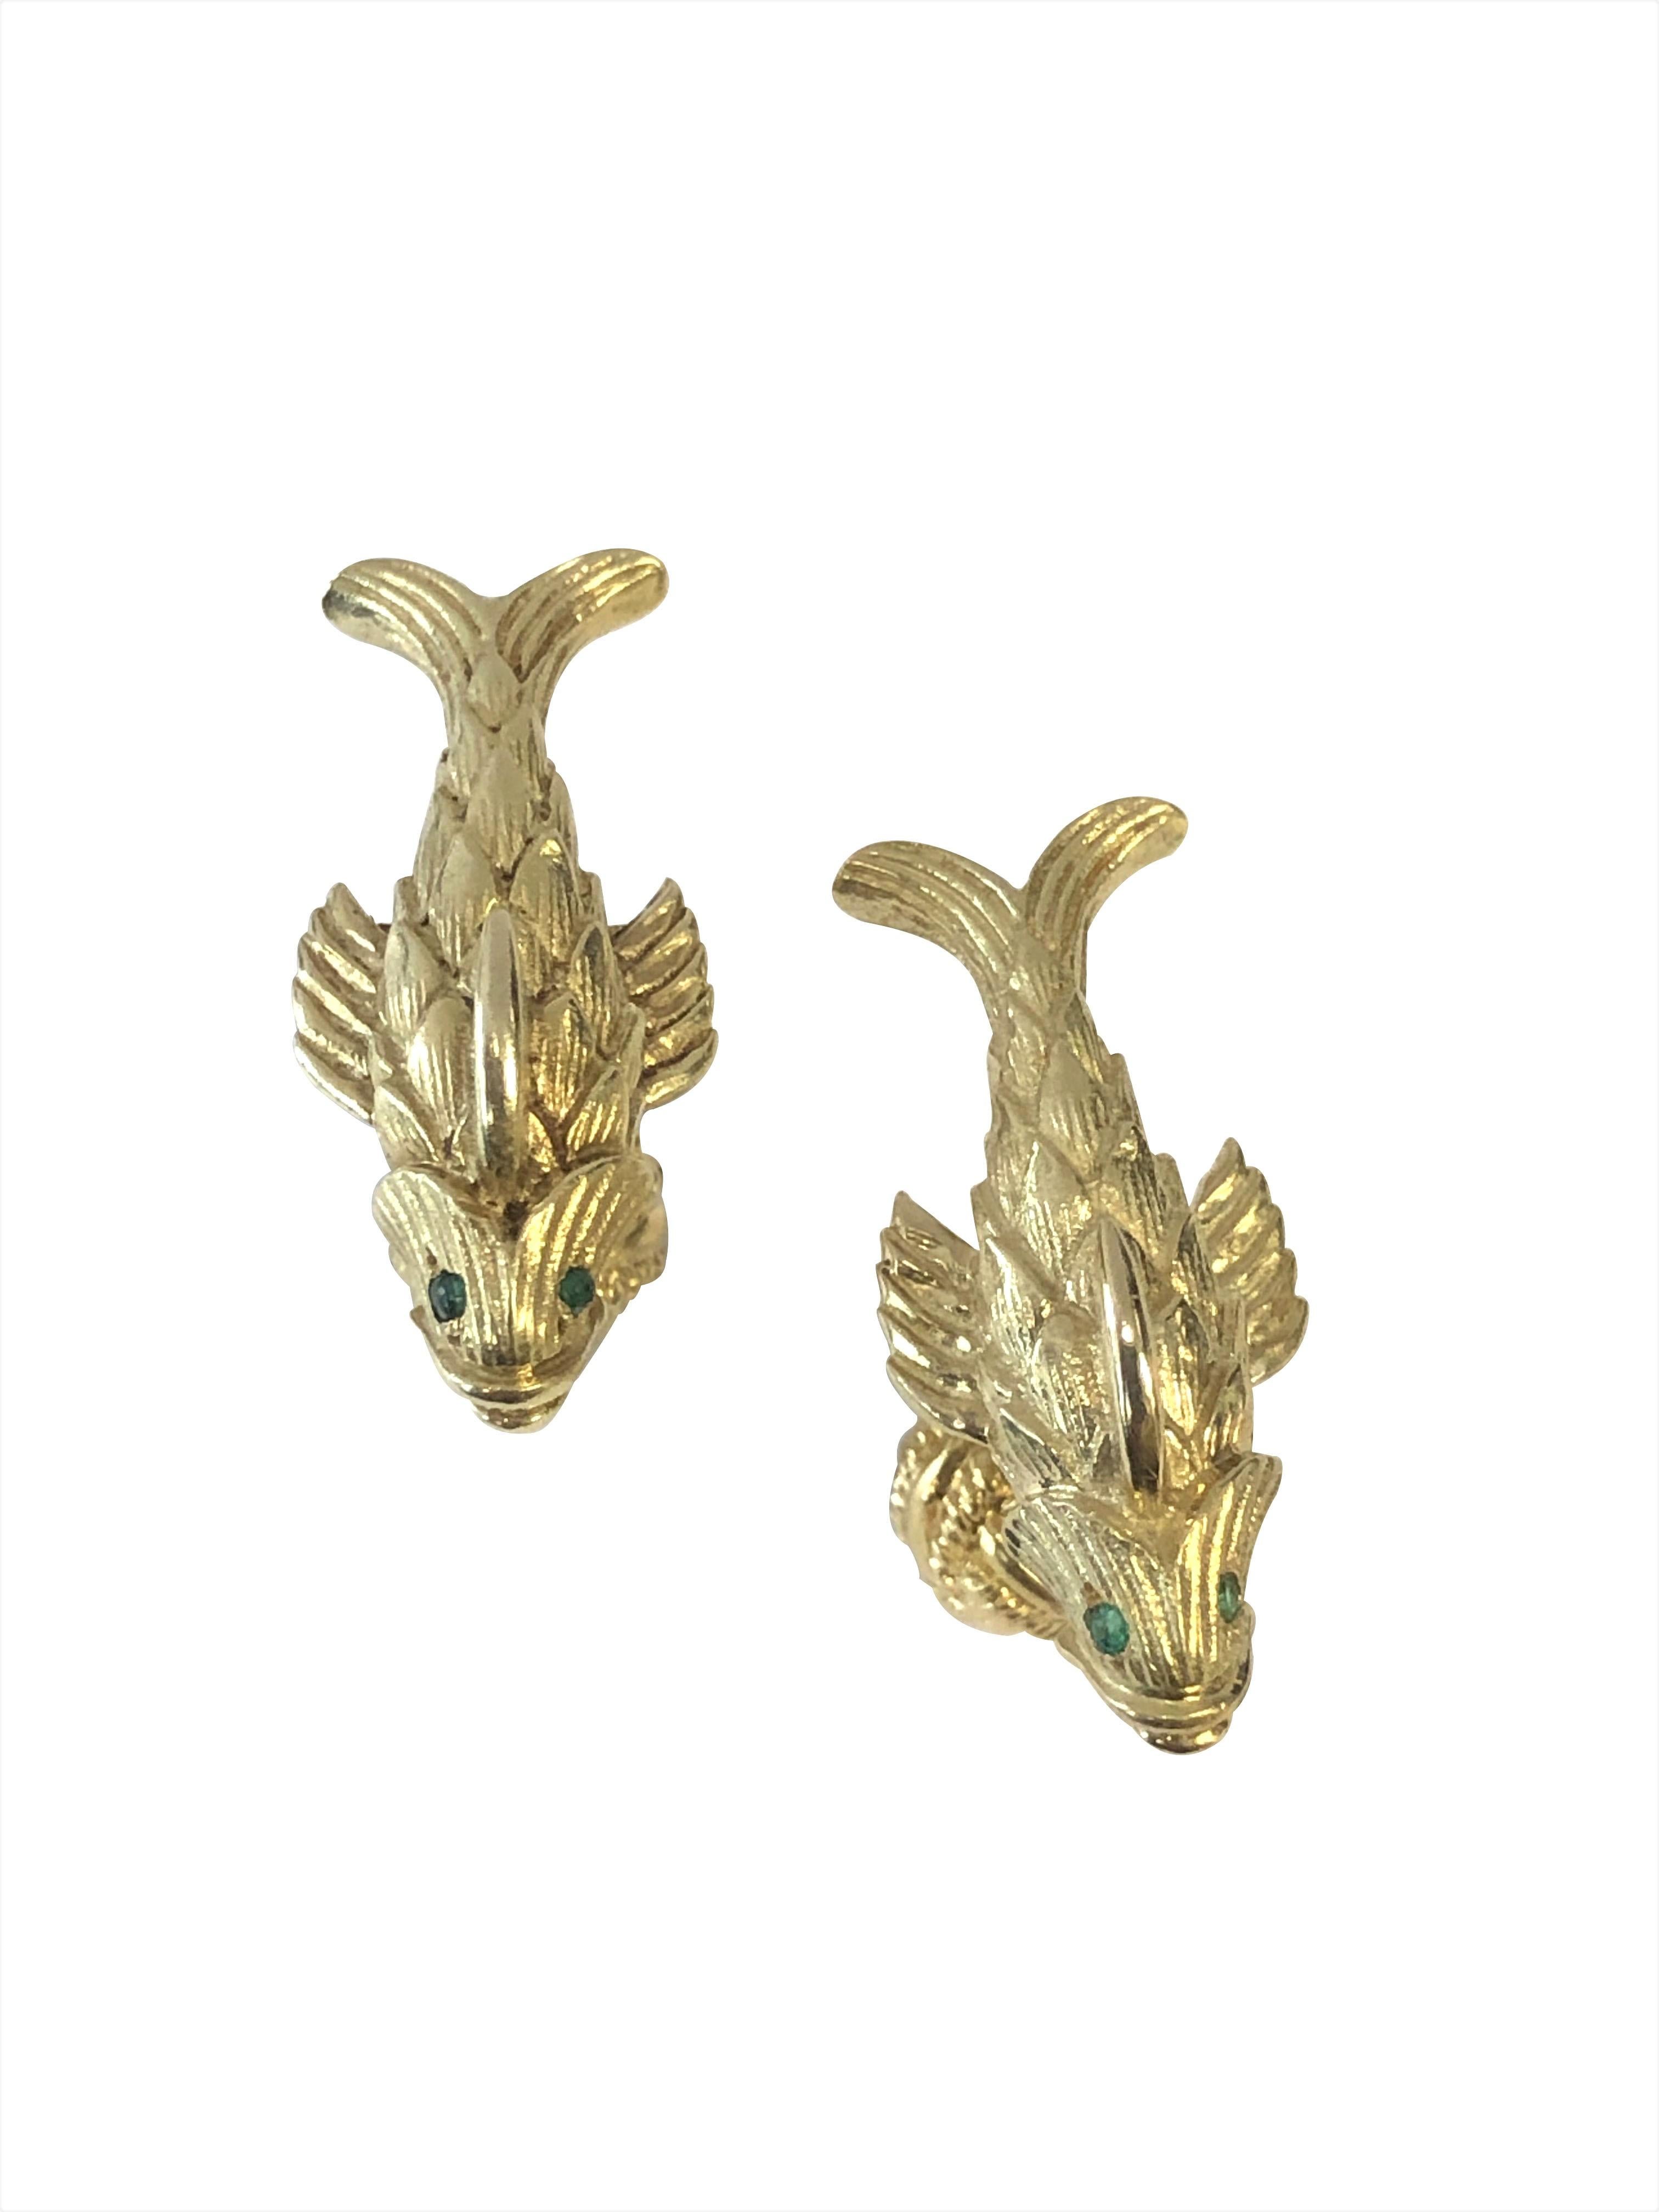 Circa 1990 Jean Schlumberger for Tiffany & Company 18K Yellow Gold Fish Form Cufflinks. The tops measure 1 1/8 inch in length X 1/2 inch wide, solid heavy construction, nicely detailed and having Cabochon Emerald Eyes. 